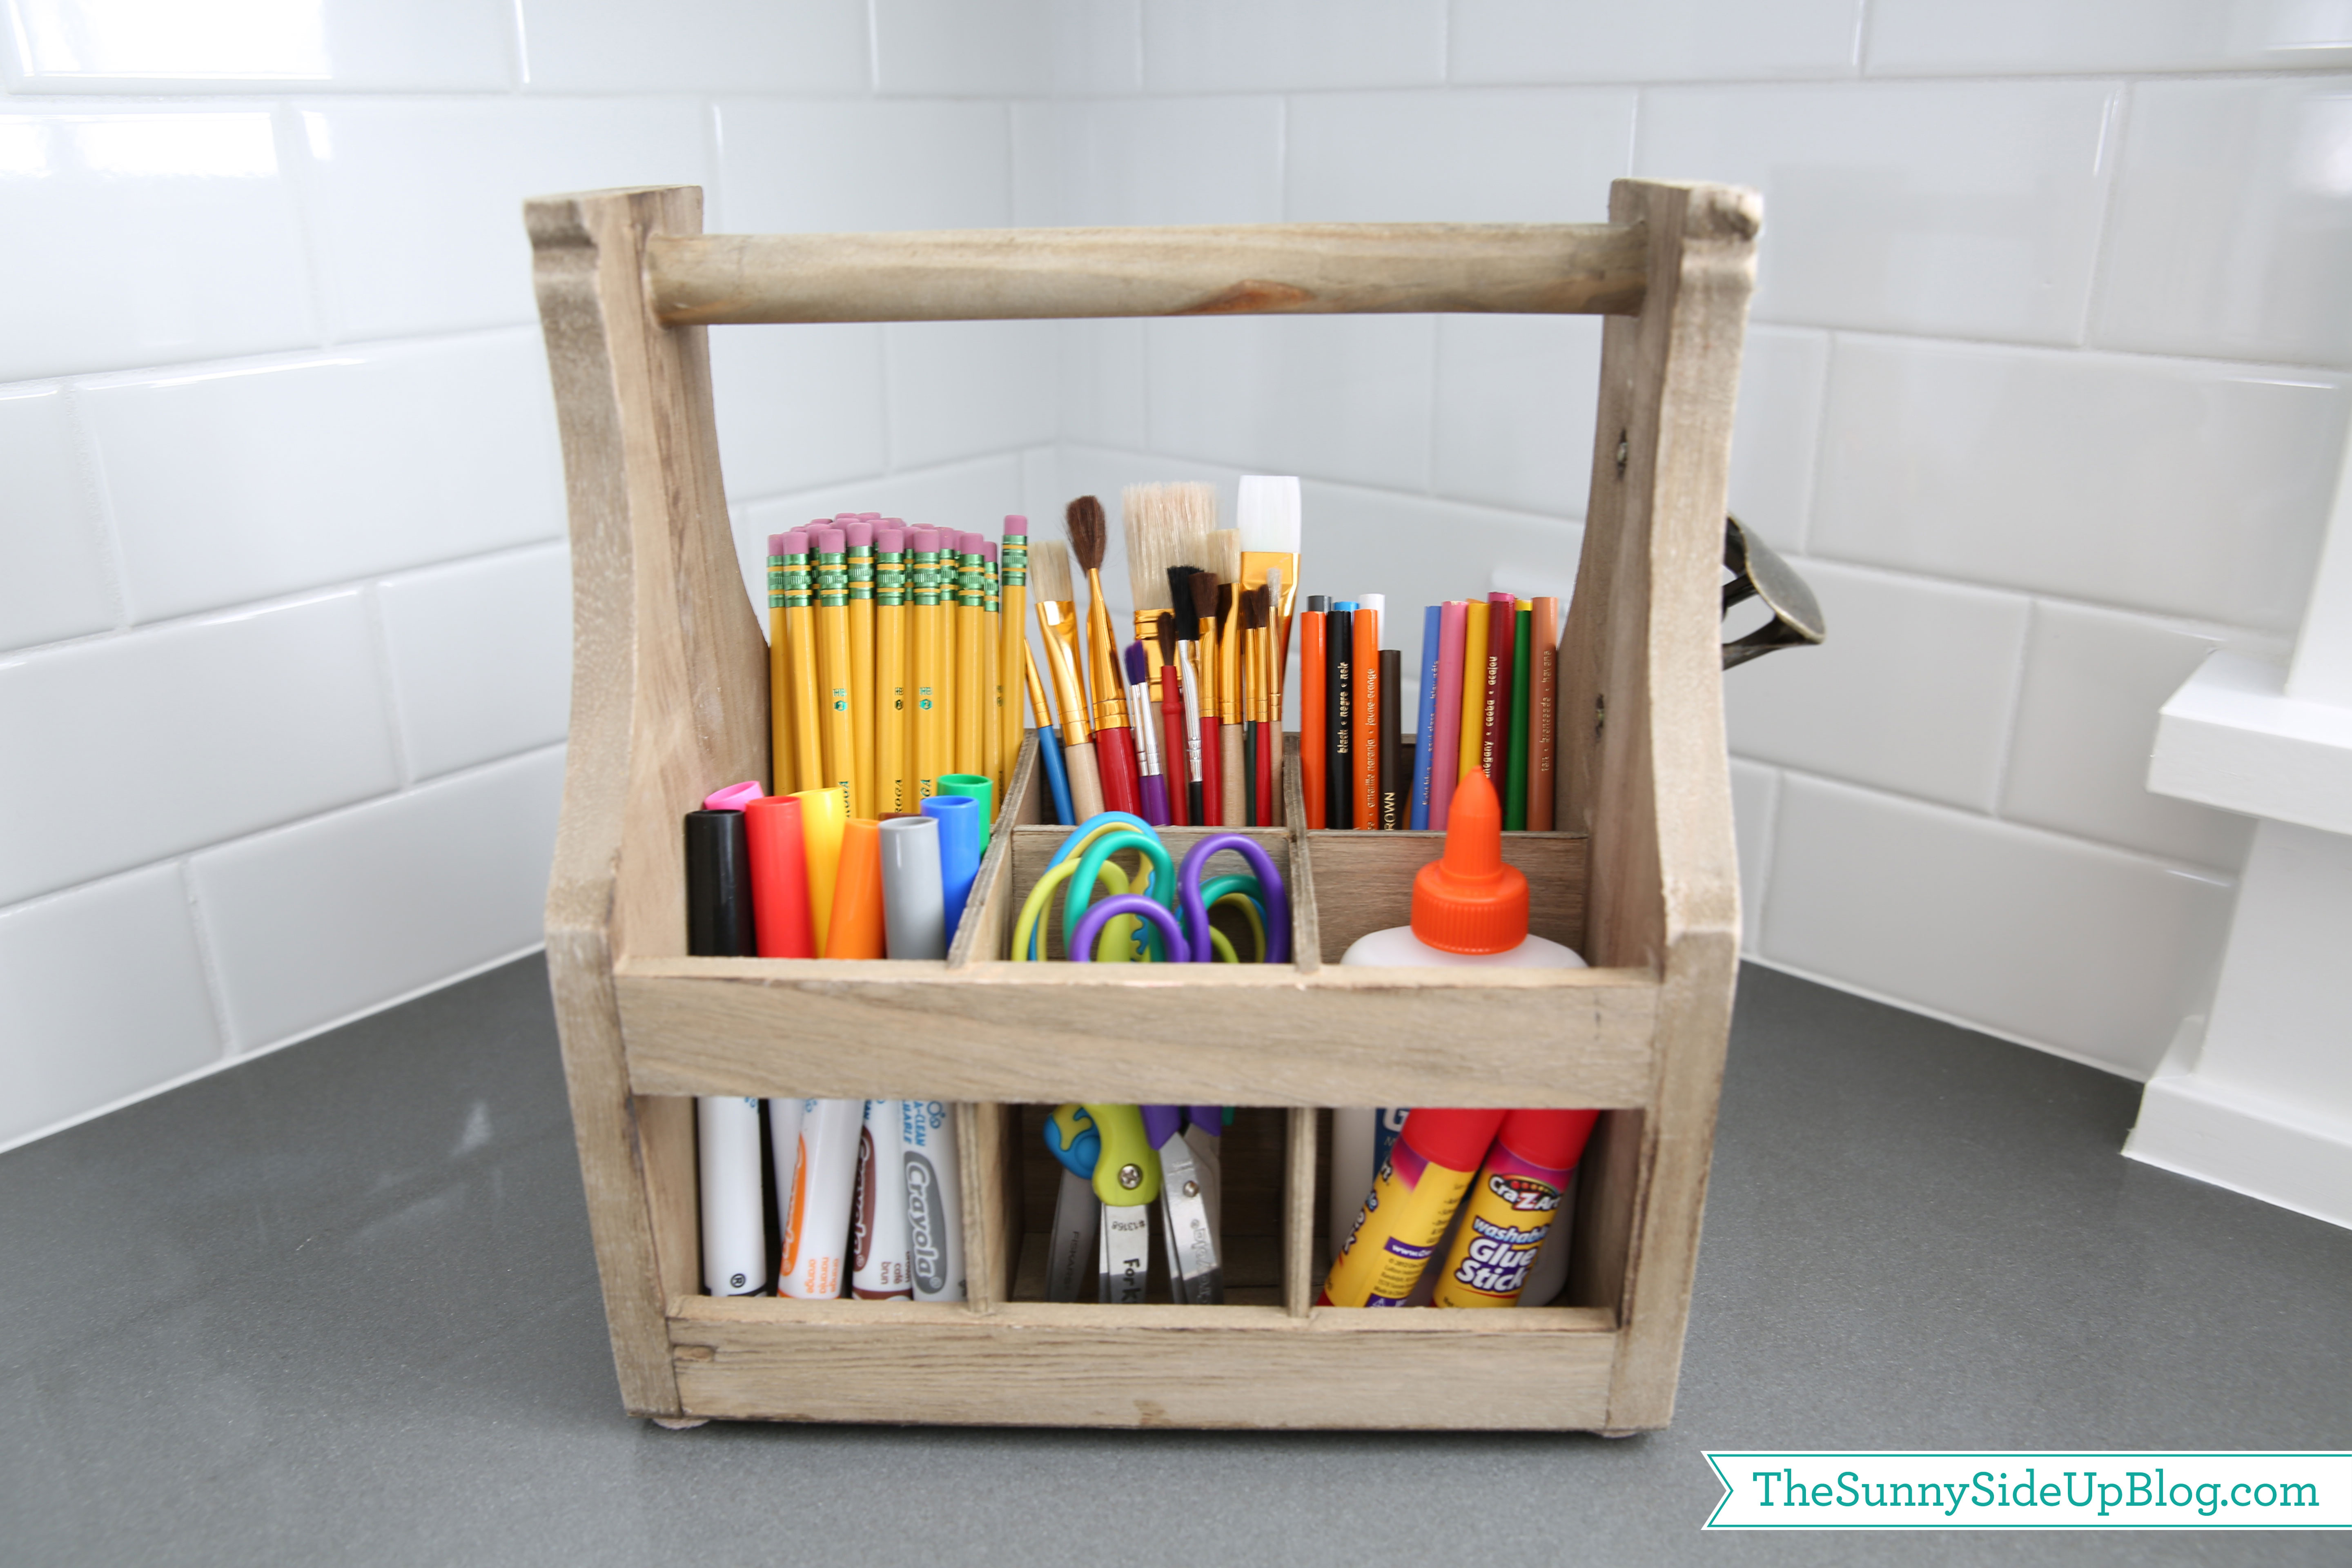 School Organizer
 10 things to do now to organized for back to school